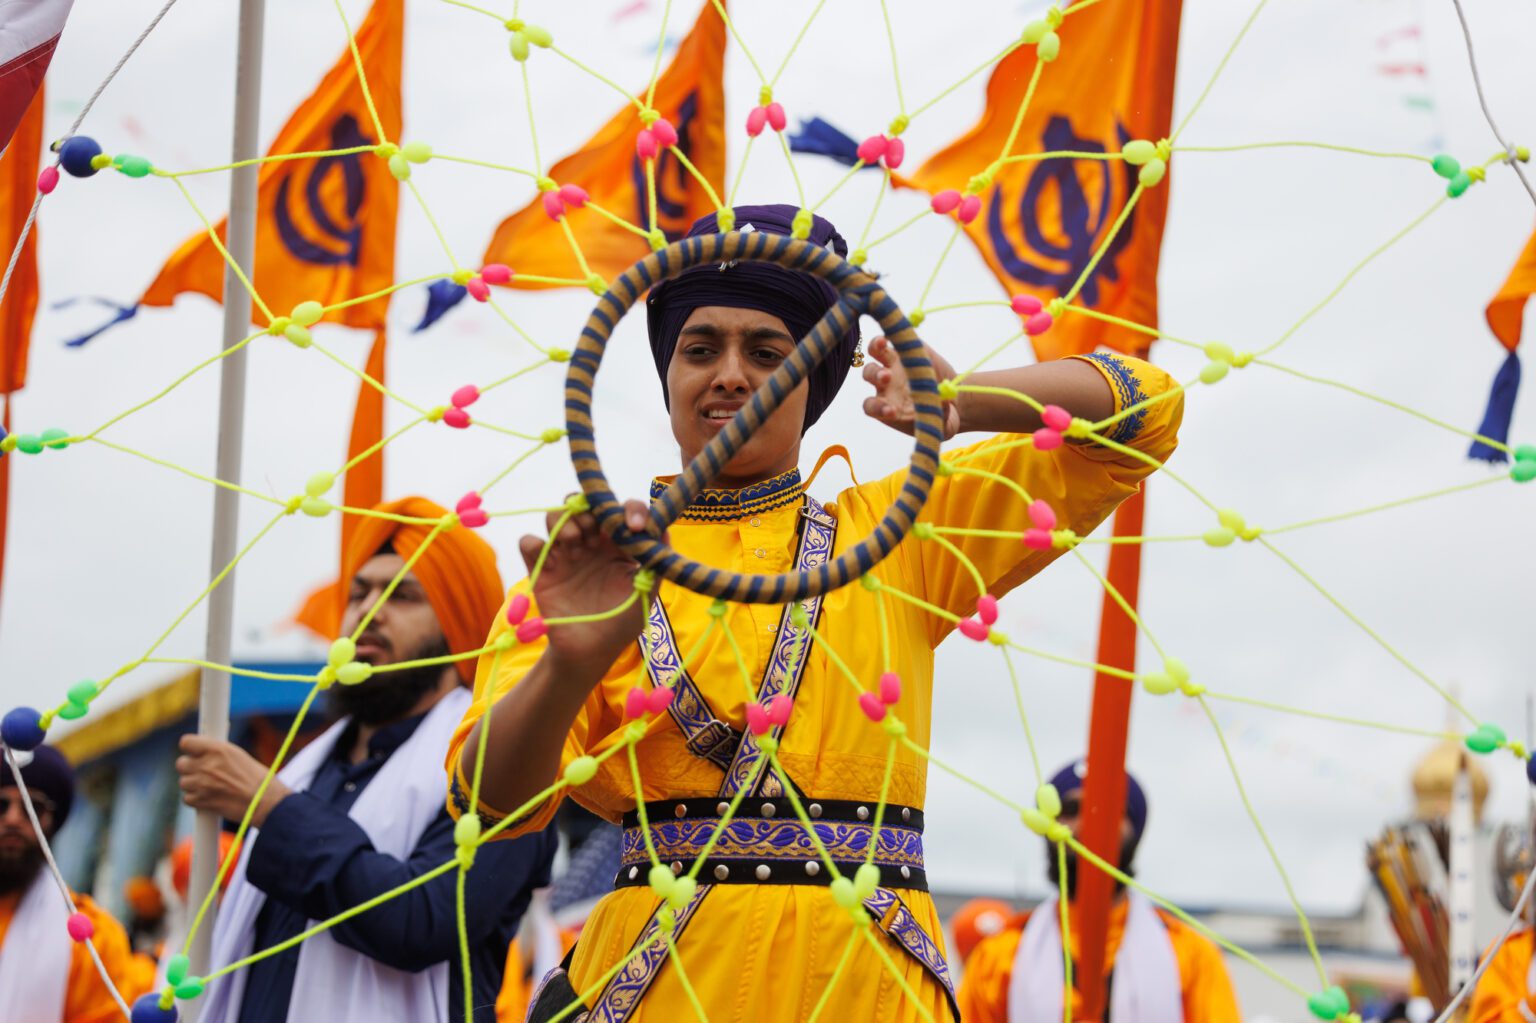 A martial artist spins a chakar Saturday, April 27 in Lynden as the Guru Nanak Gursihk Gurdwara Sahib holds a celebration of Vaisakhi, also known as Baisakhi, one of the most significant festivals in the Sikh calendar.